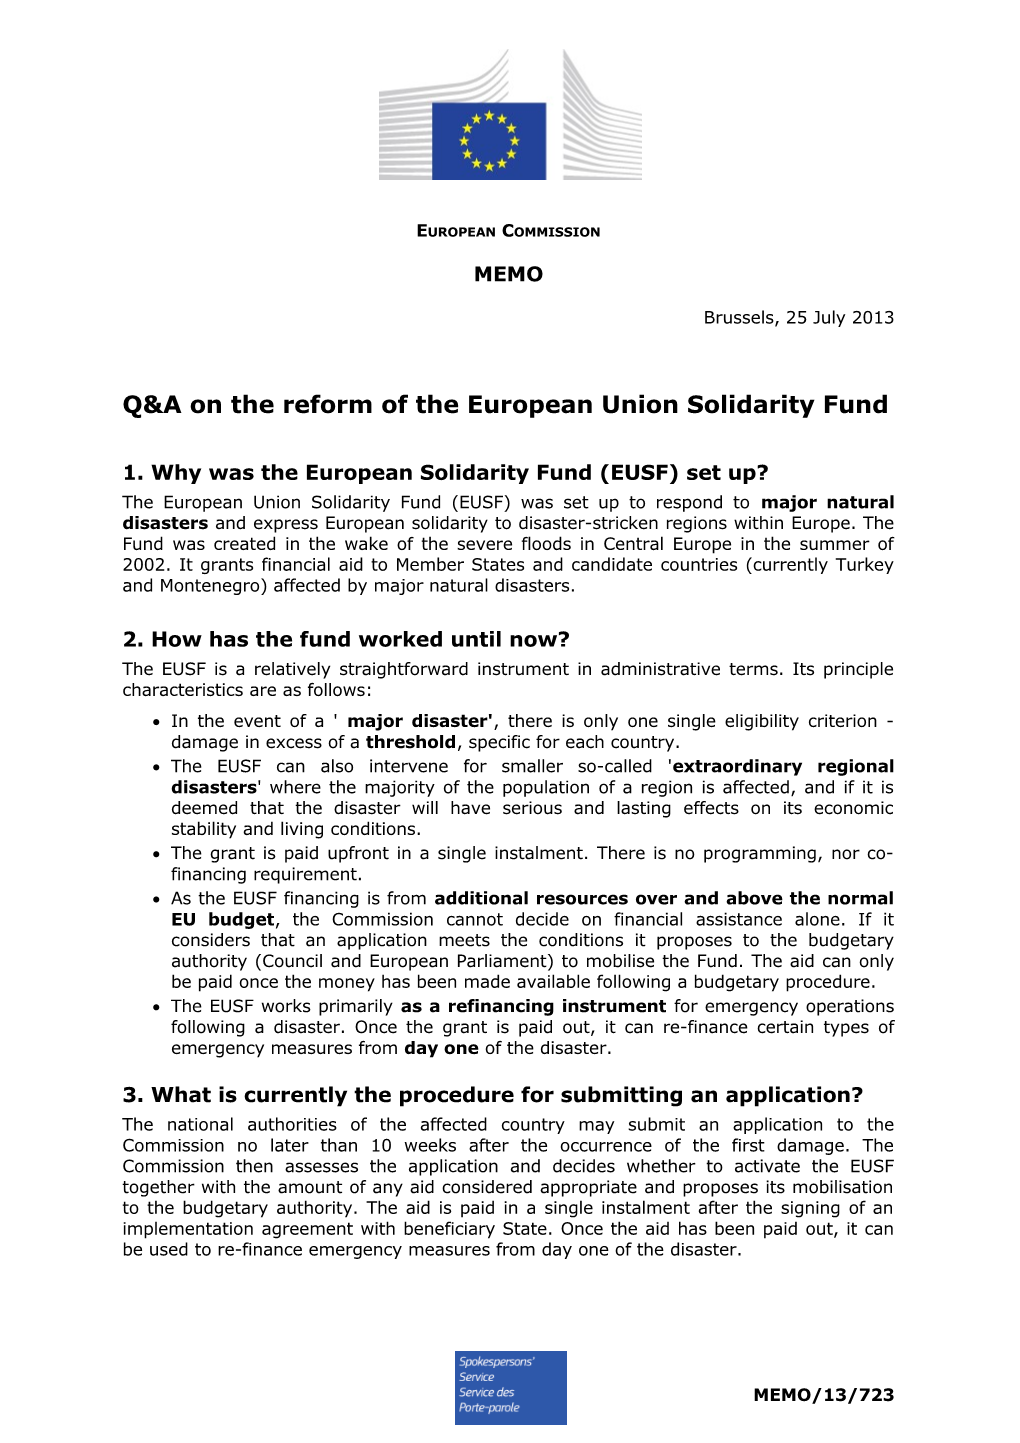 Q&A on the Reform of the European Union Solidarity Fund